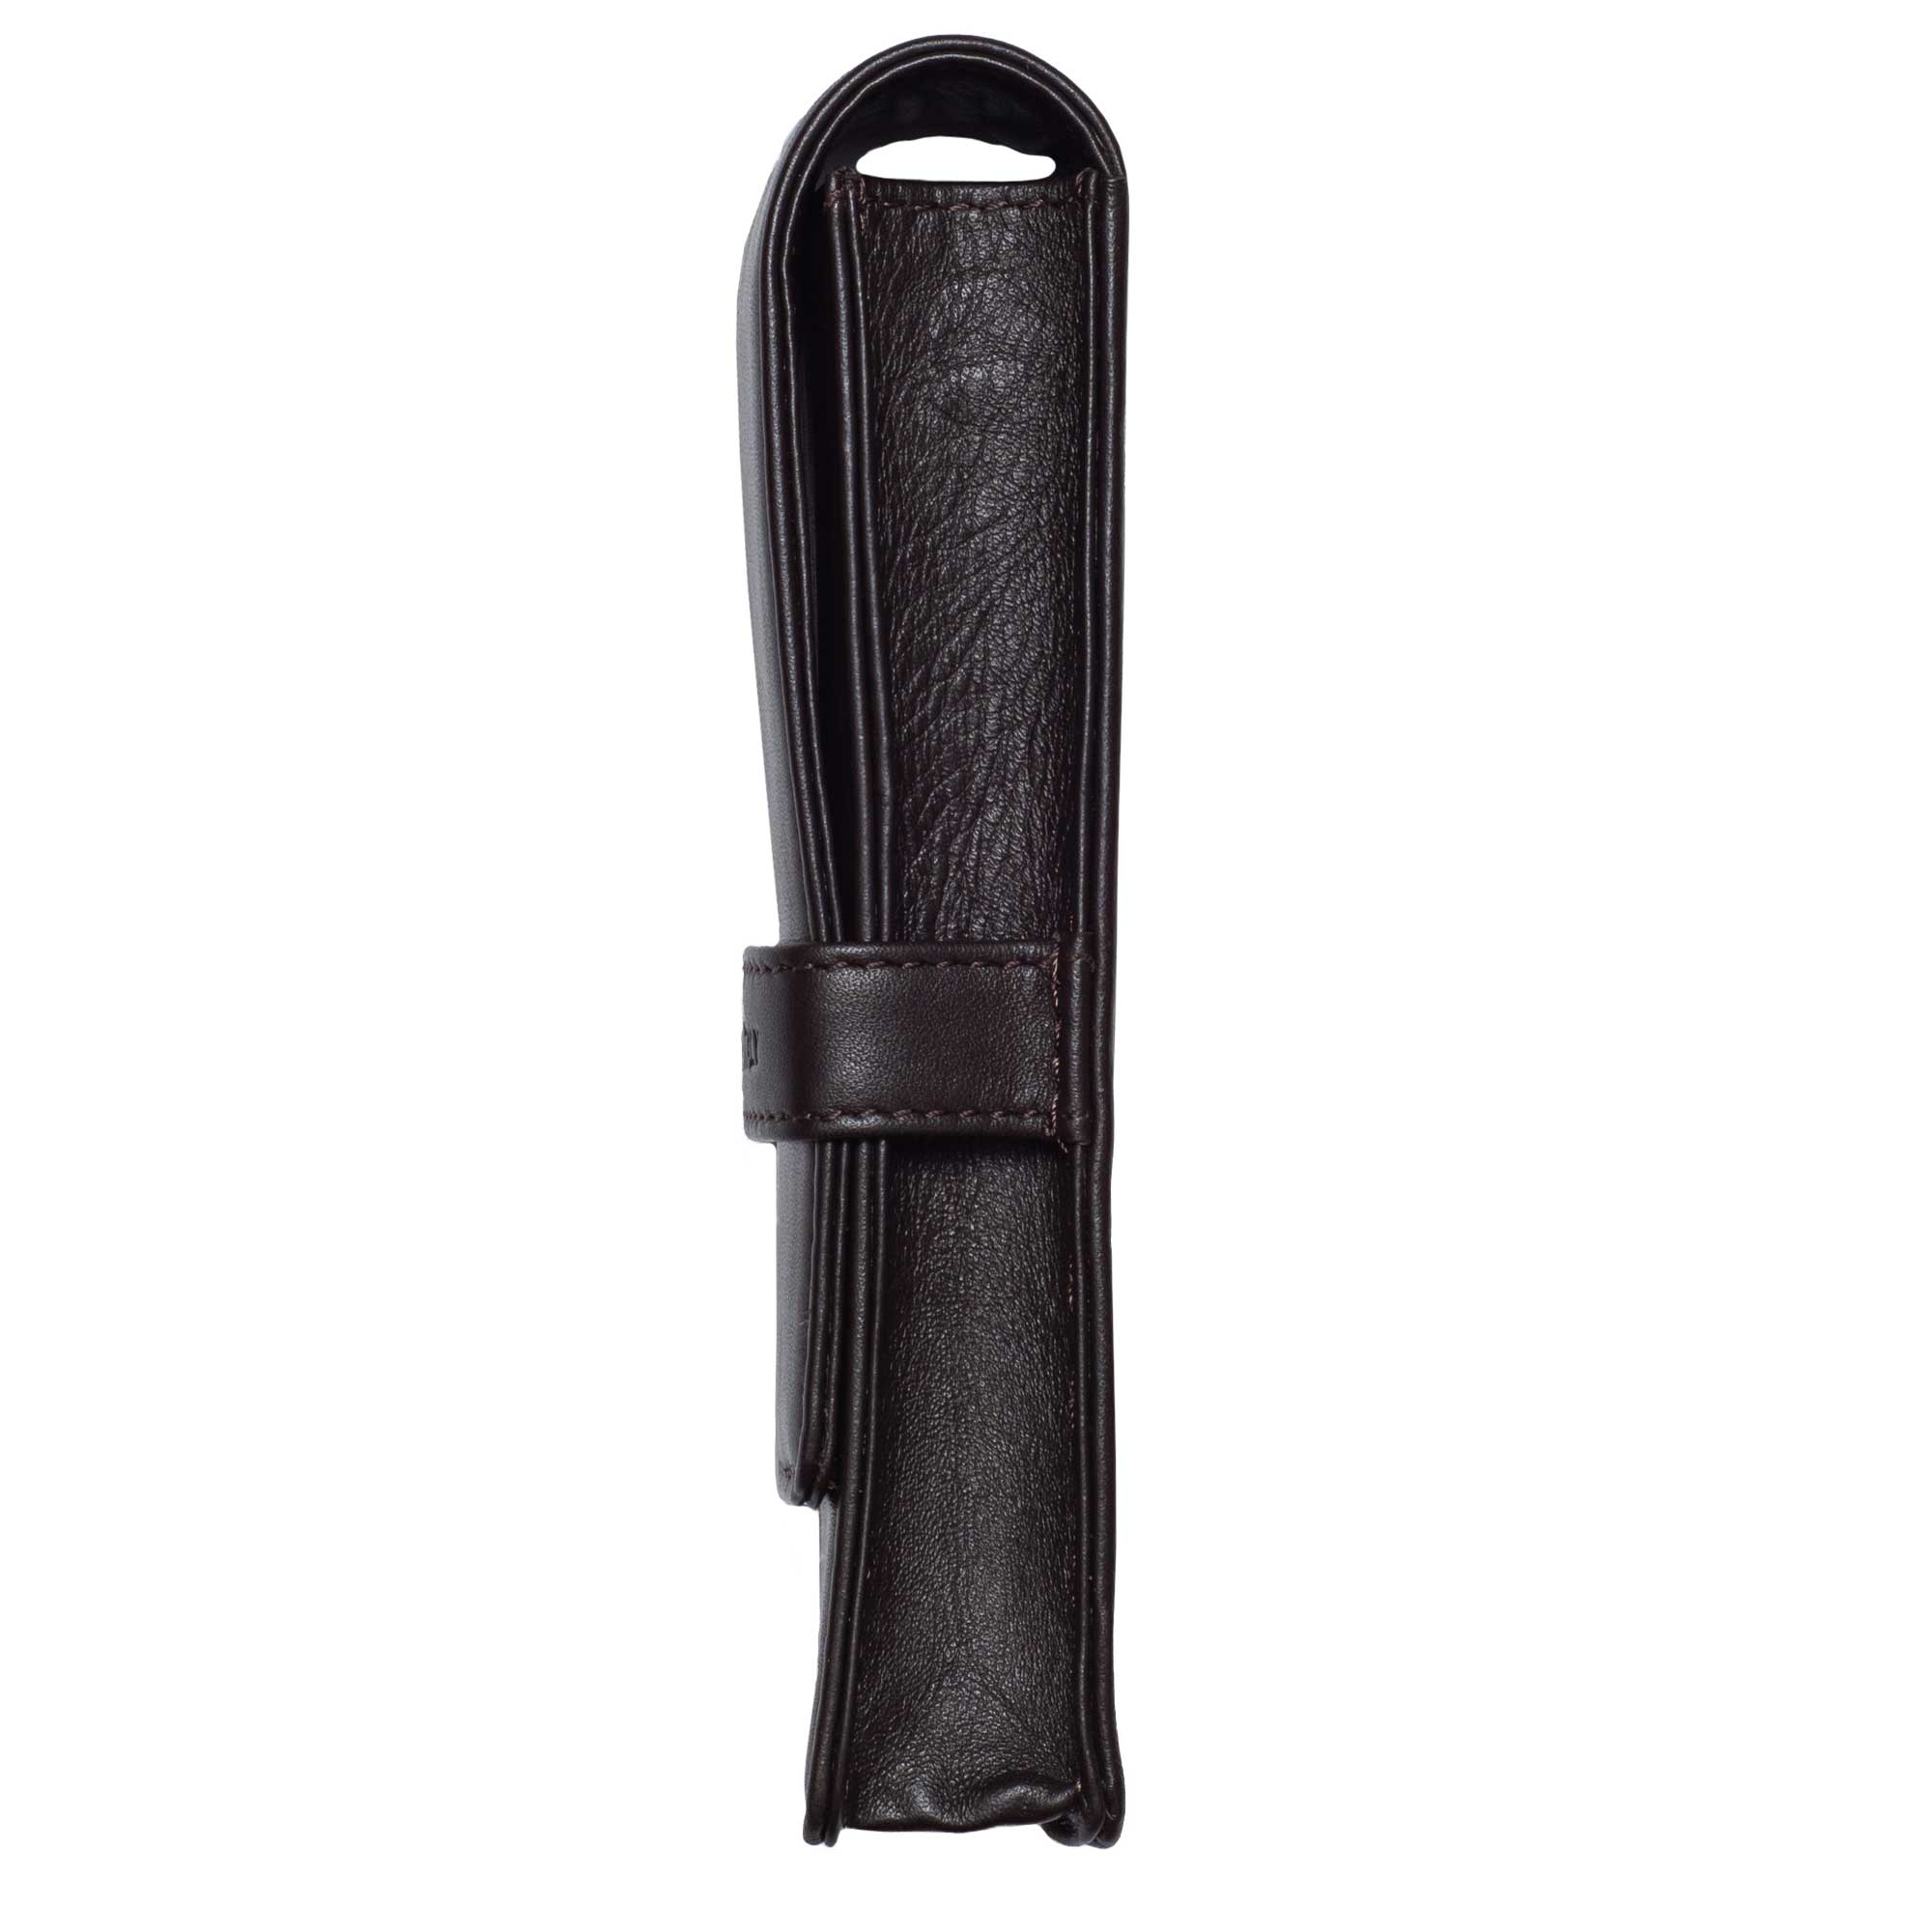 DiLoro Double Pen Case Holder in Top Quality, Full Grain Nappa Leather - Dark Brown (side, profile view)